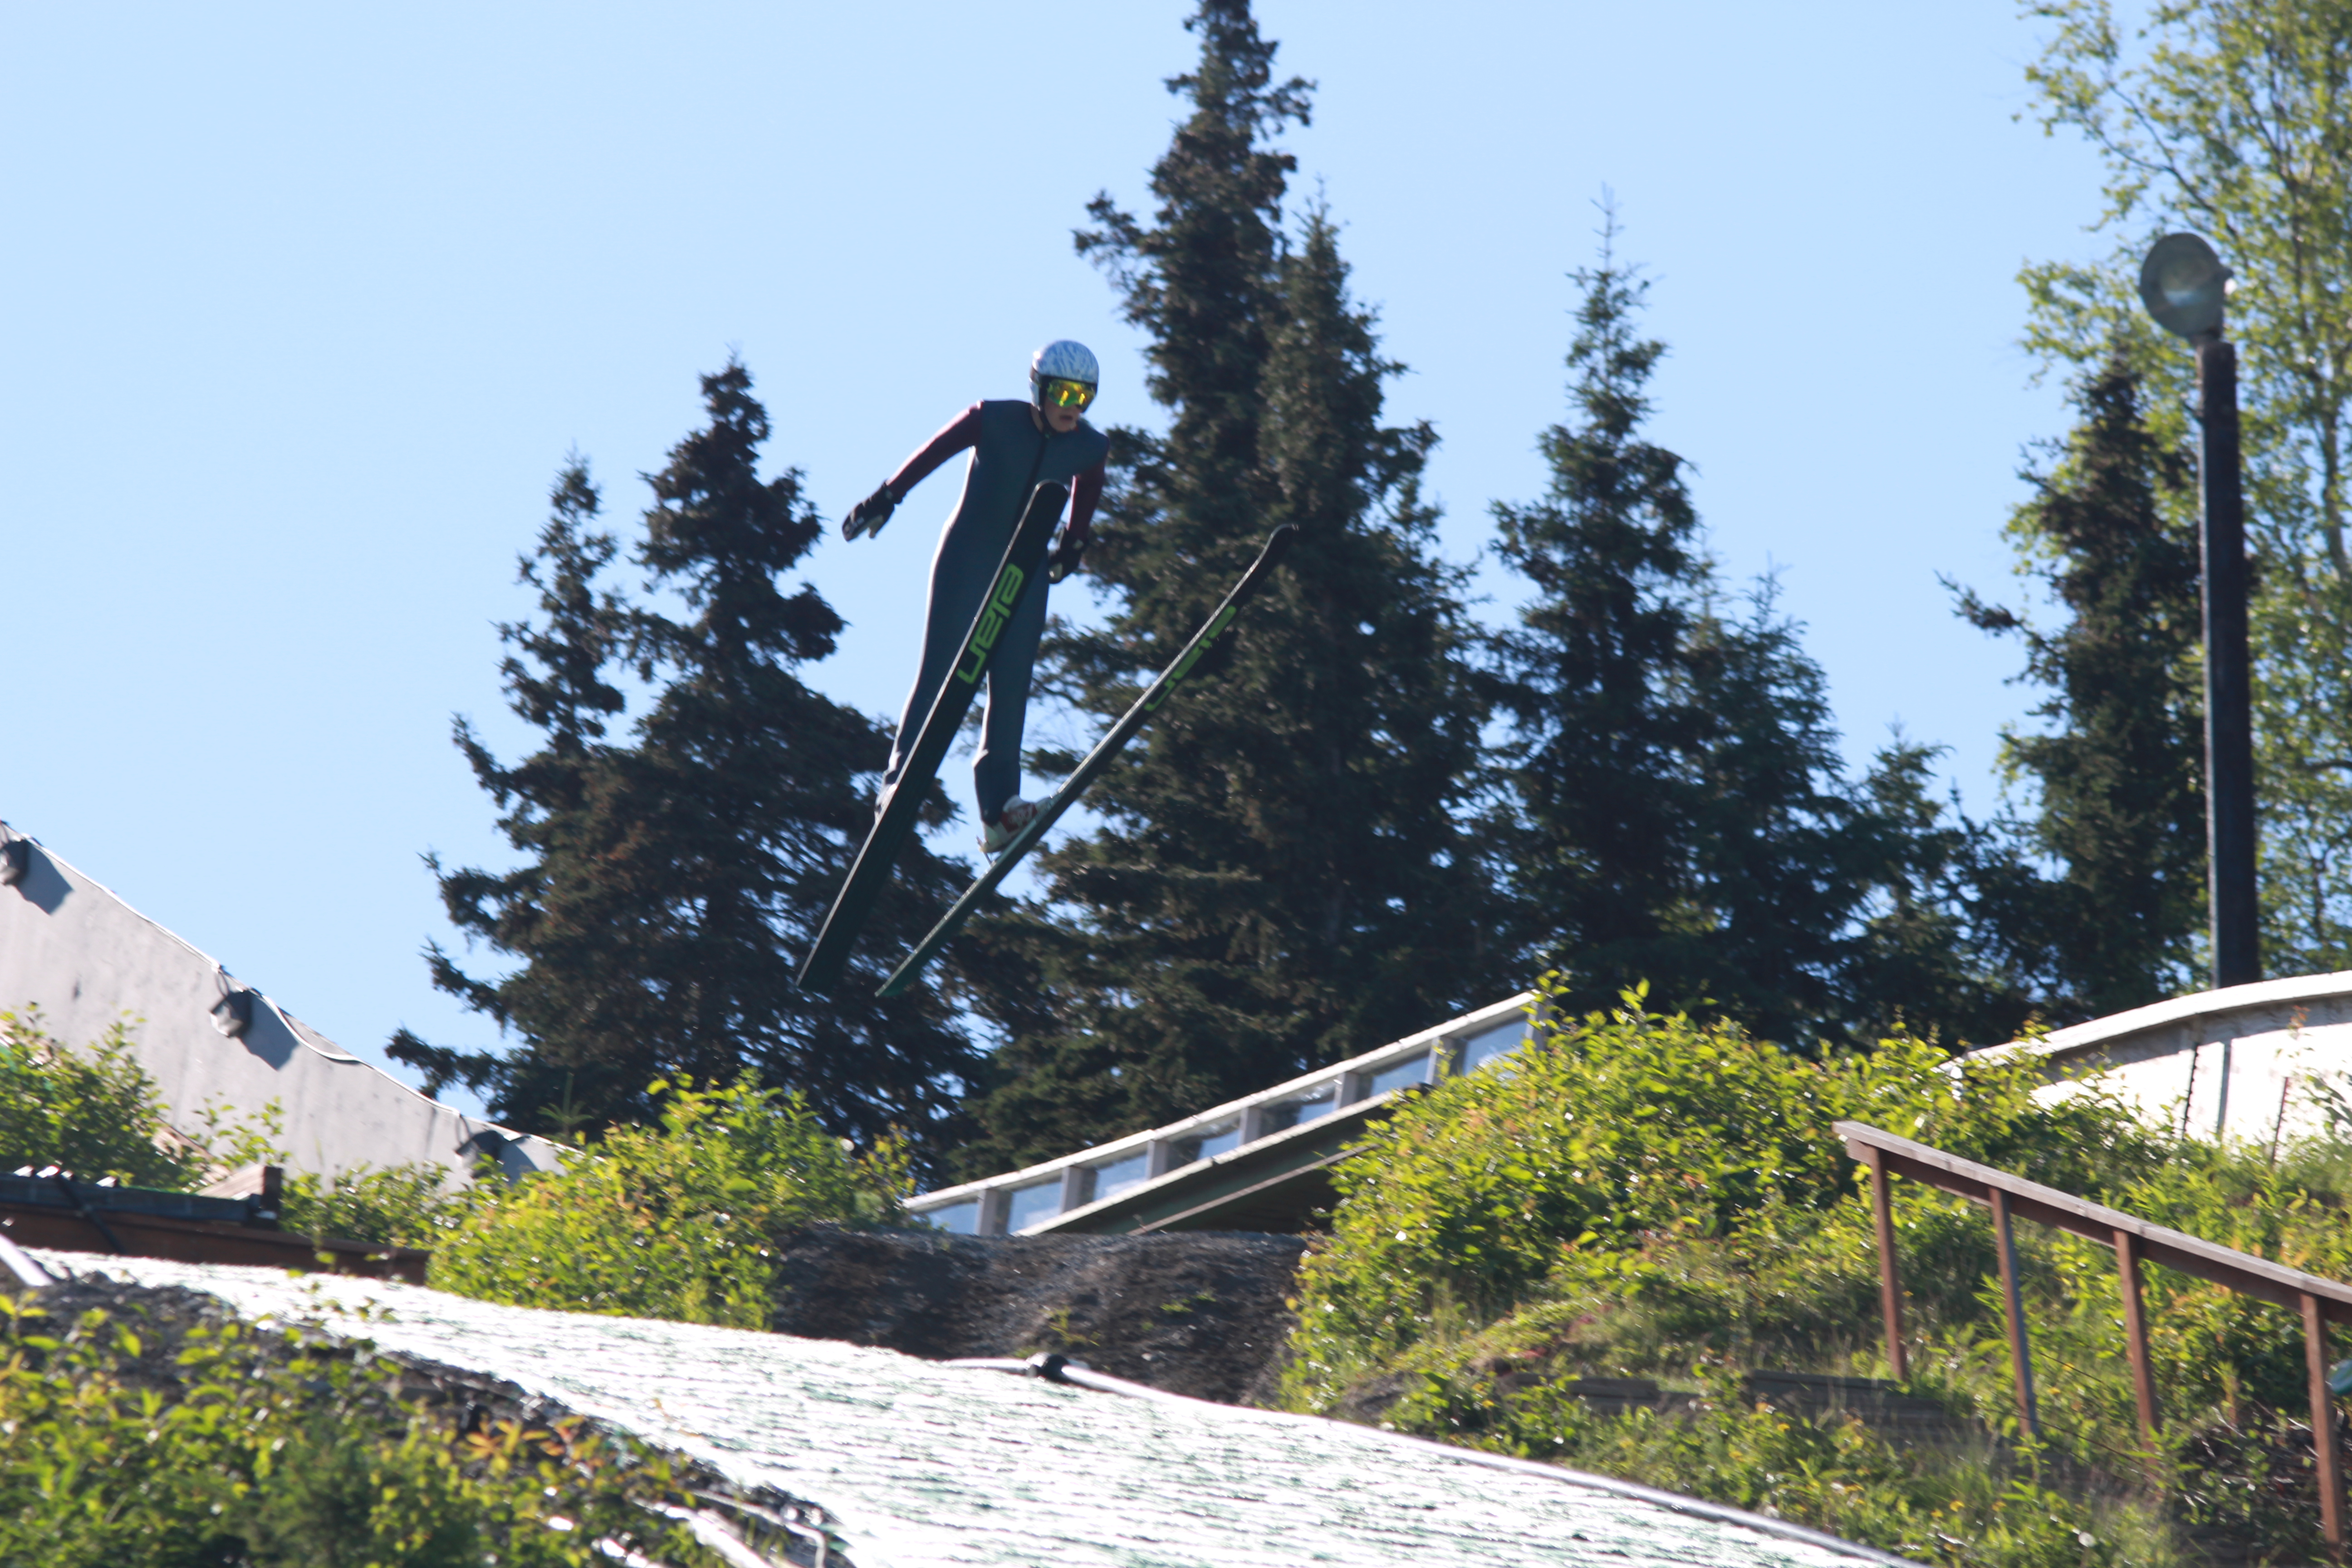 One of the skiers flies off the 40 meter ski jump. (Photo by Wesley Early, Alaska Public Media - Anchorage)